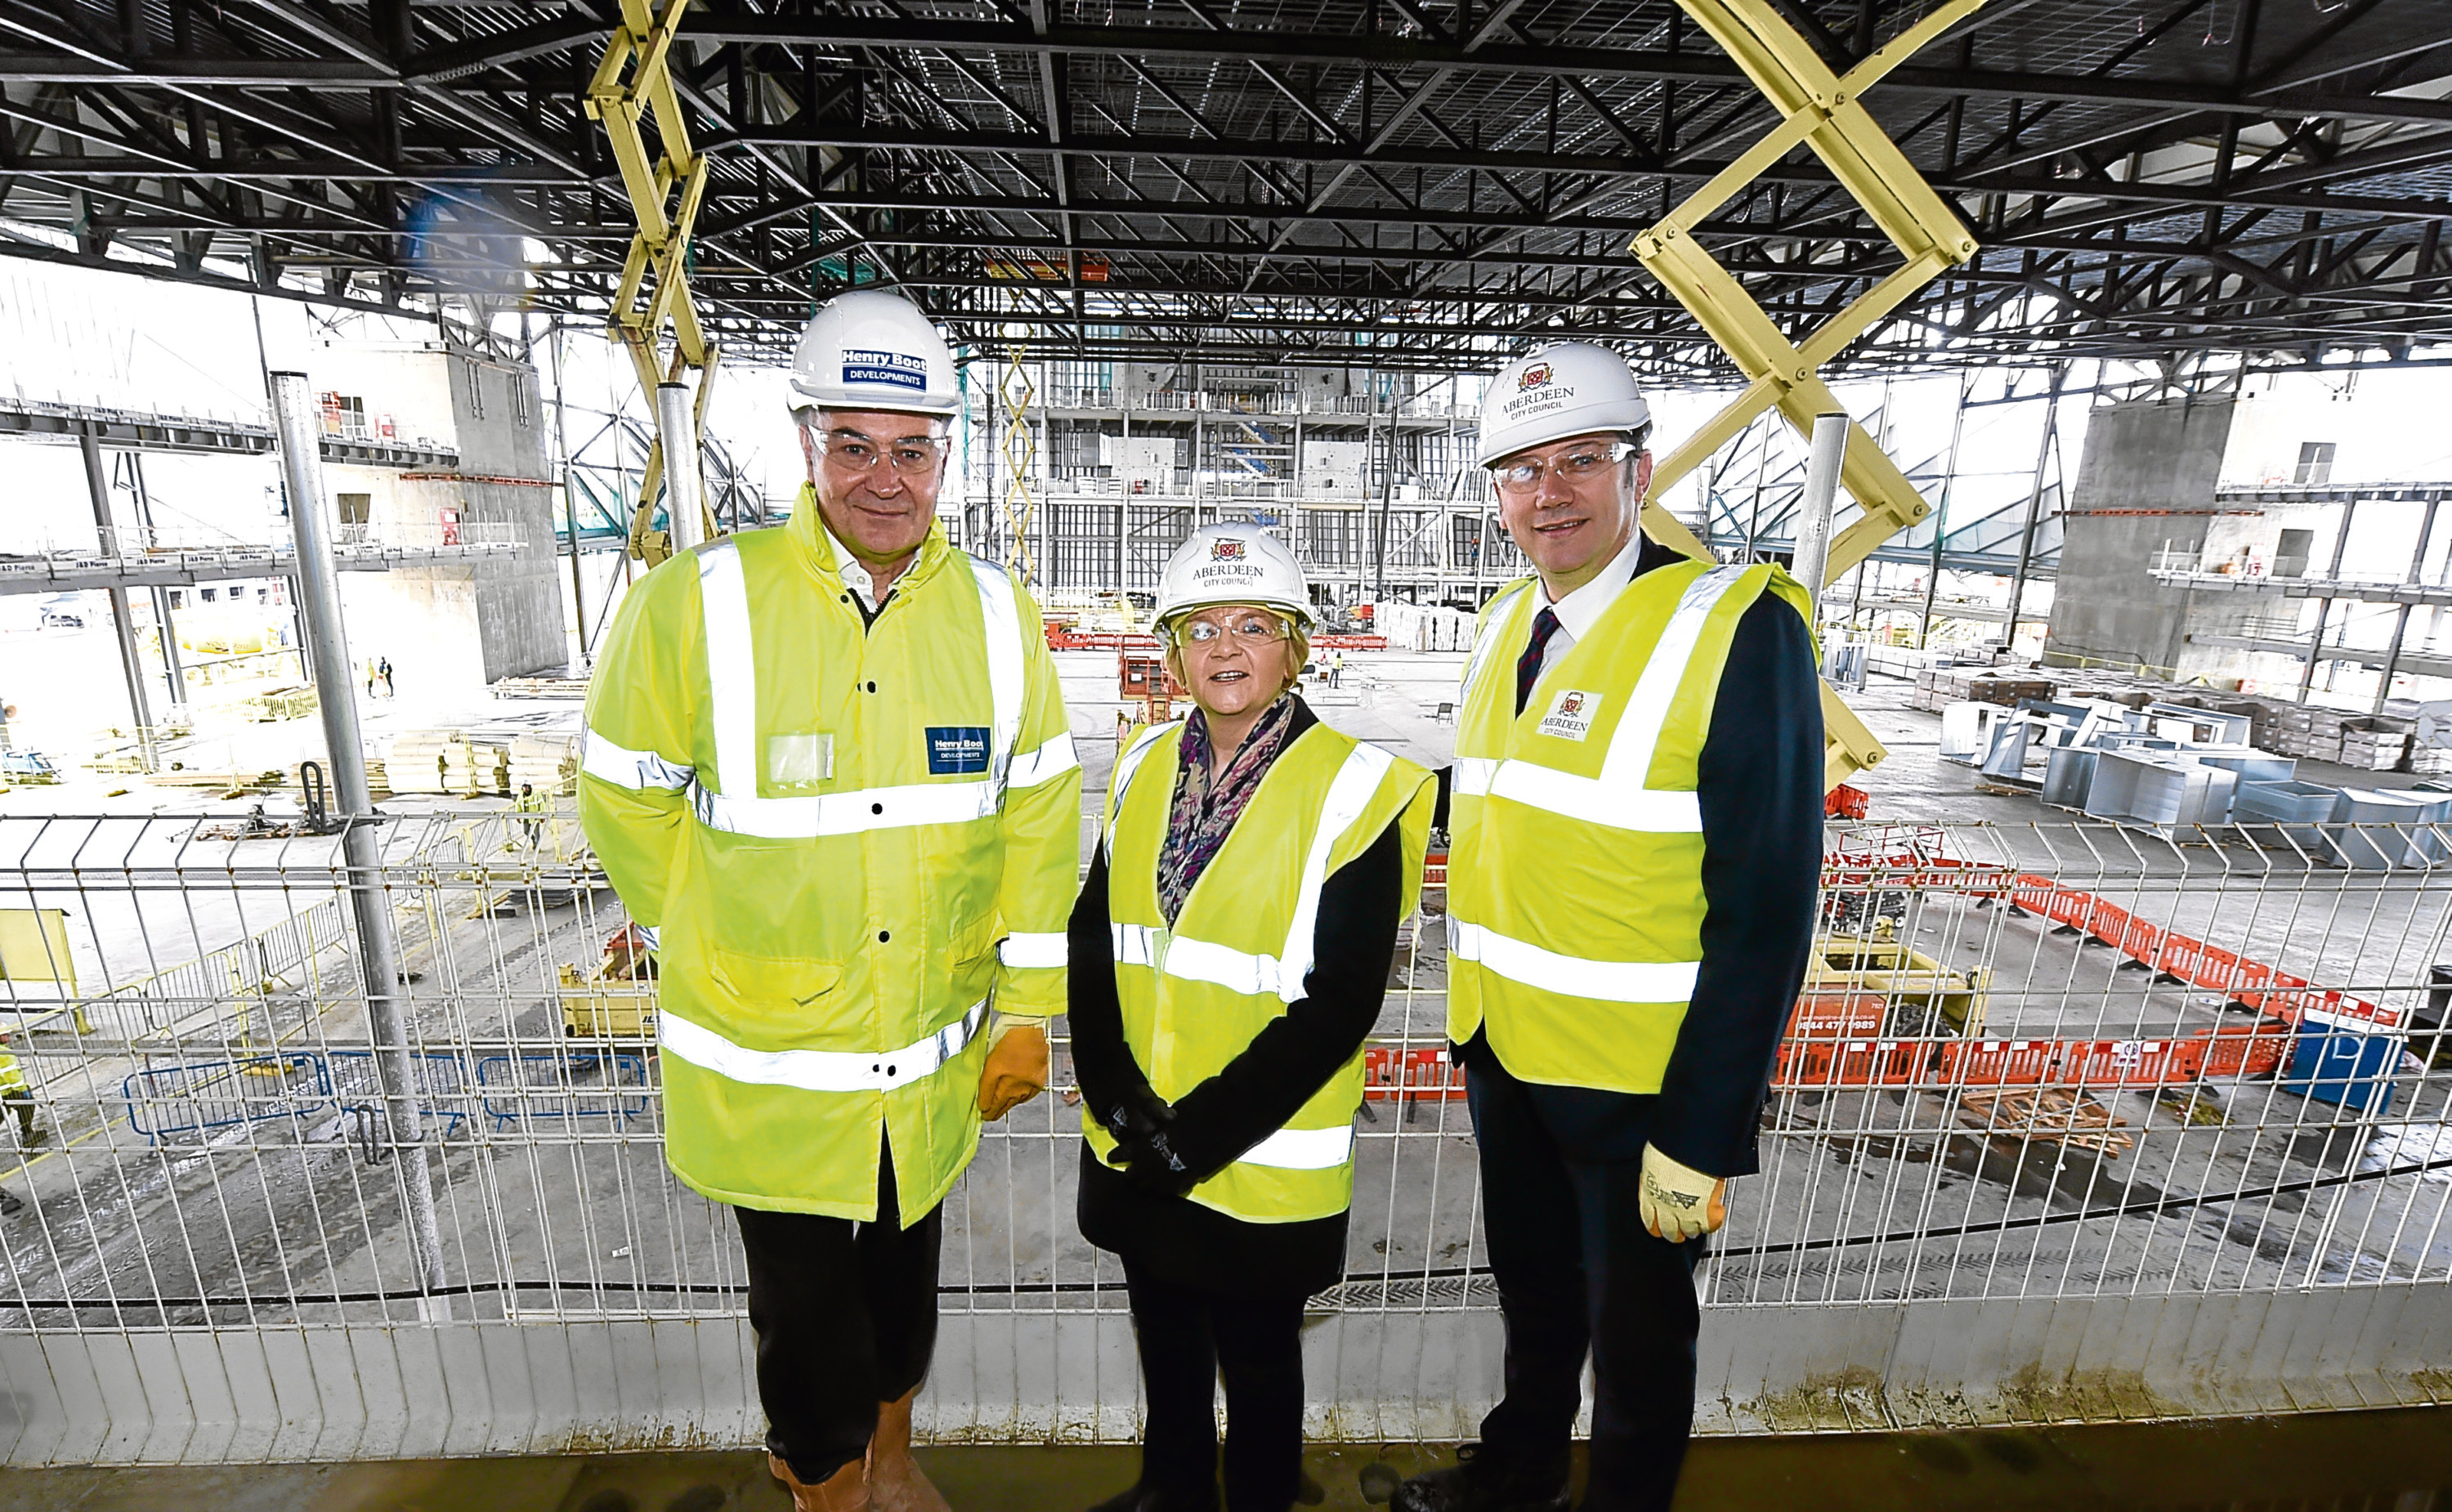 Nigel Munro, regional project manager at Henry Boot Development, Aberdeen City Council Co-Leader Councillor Jenny Laing and Co-Leader Douglas Lumsden